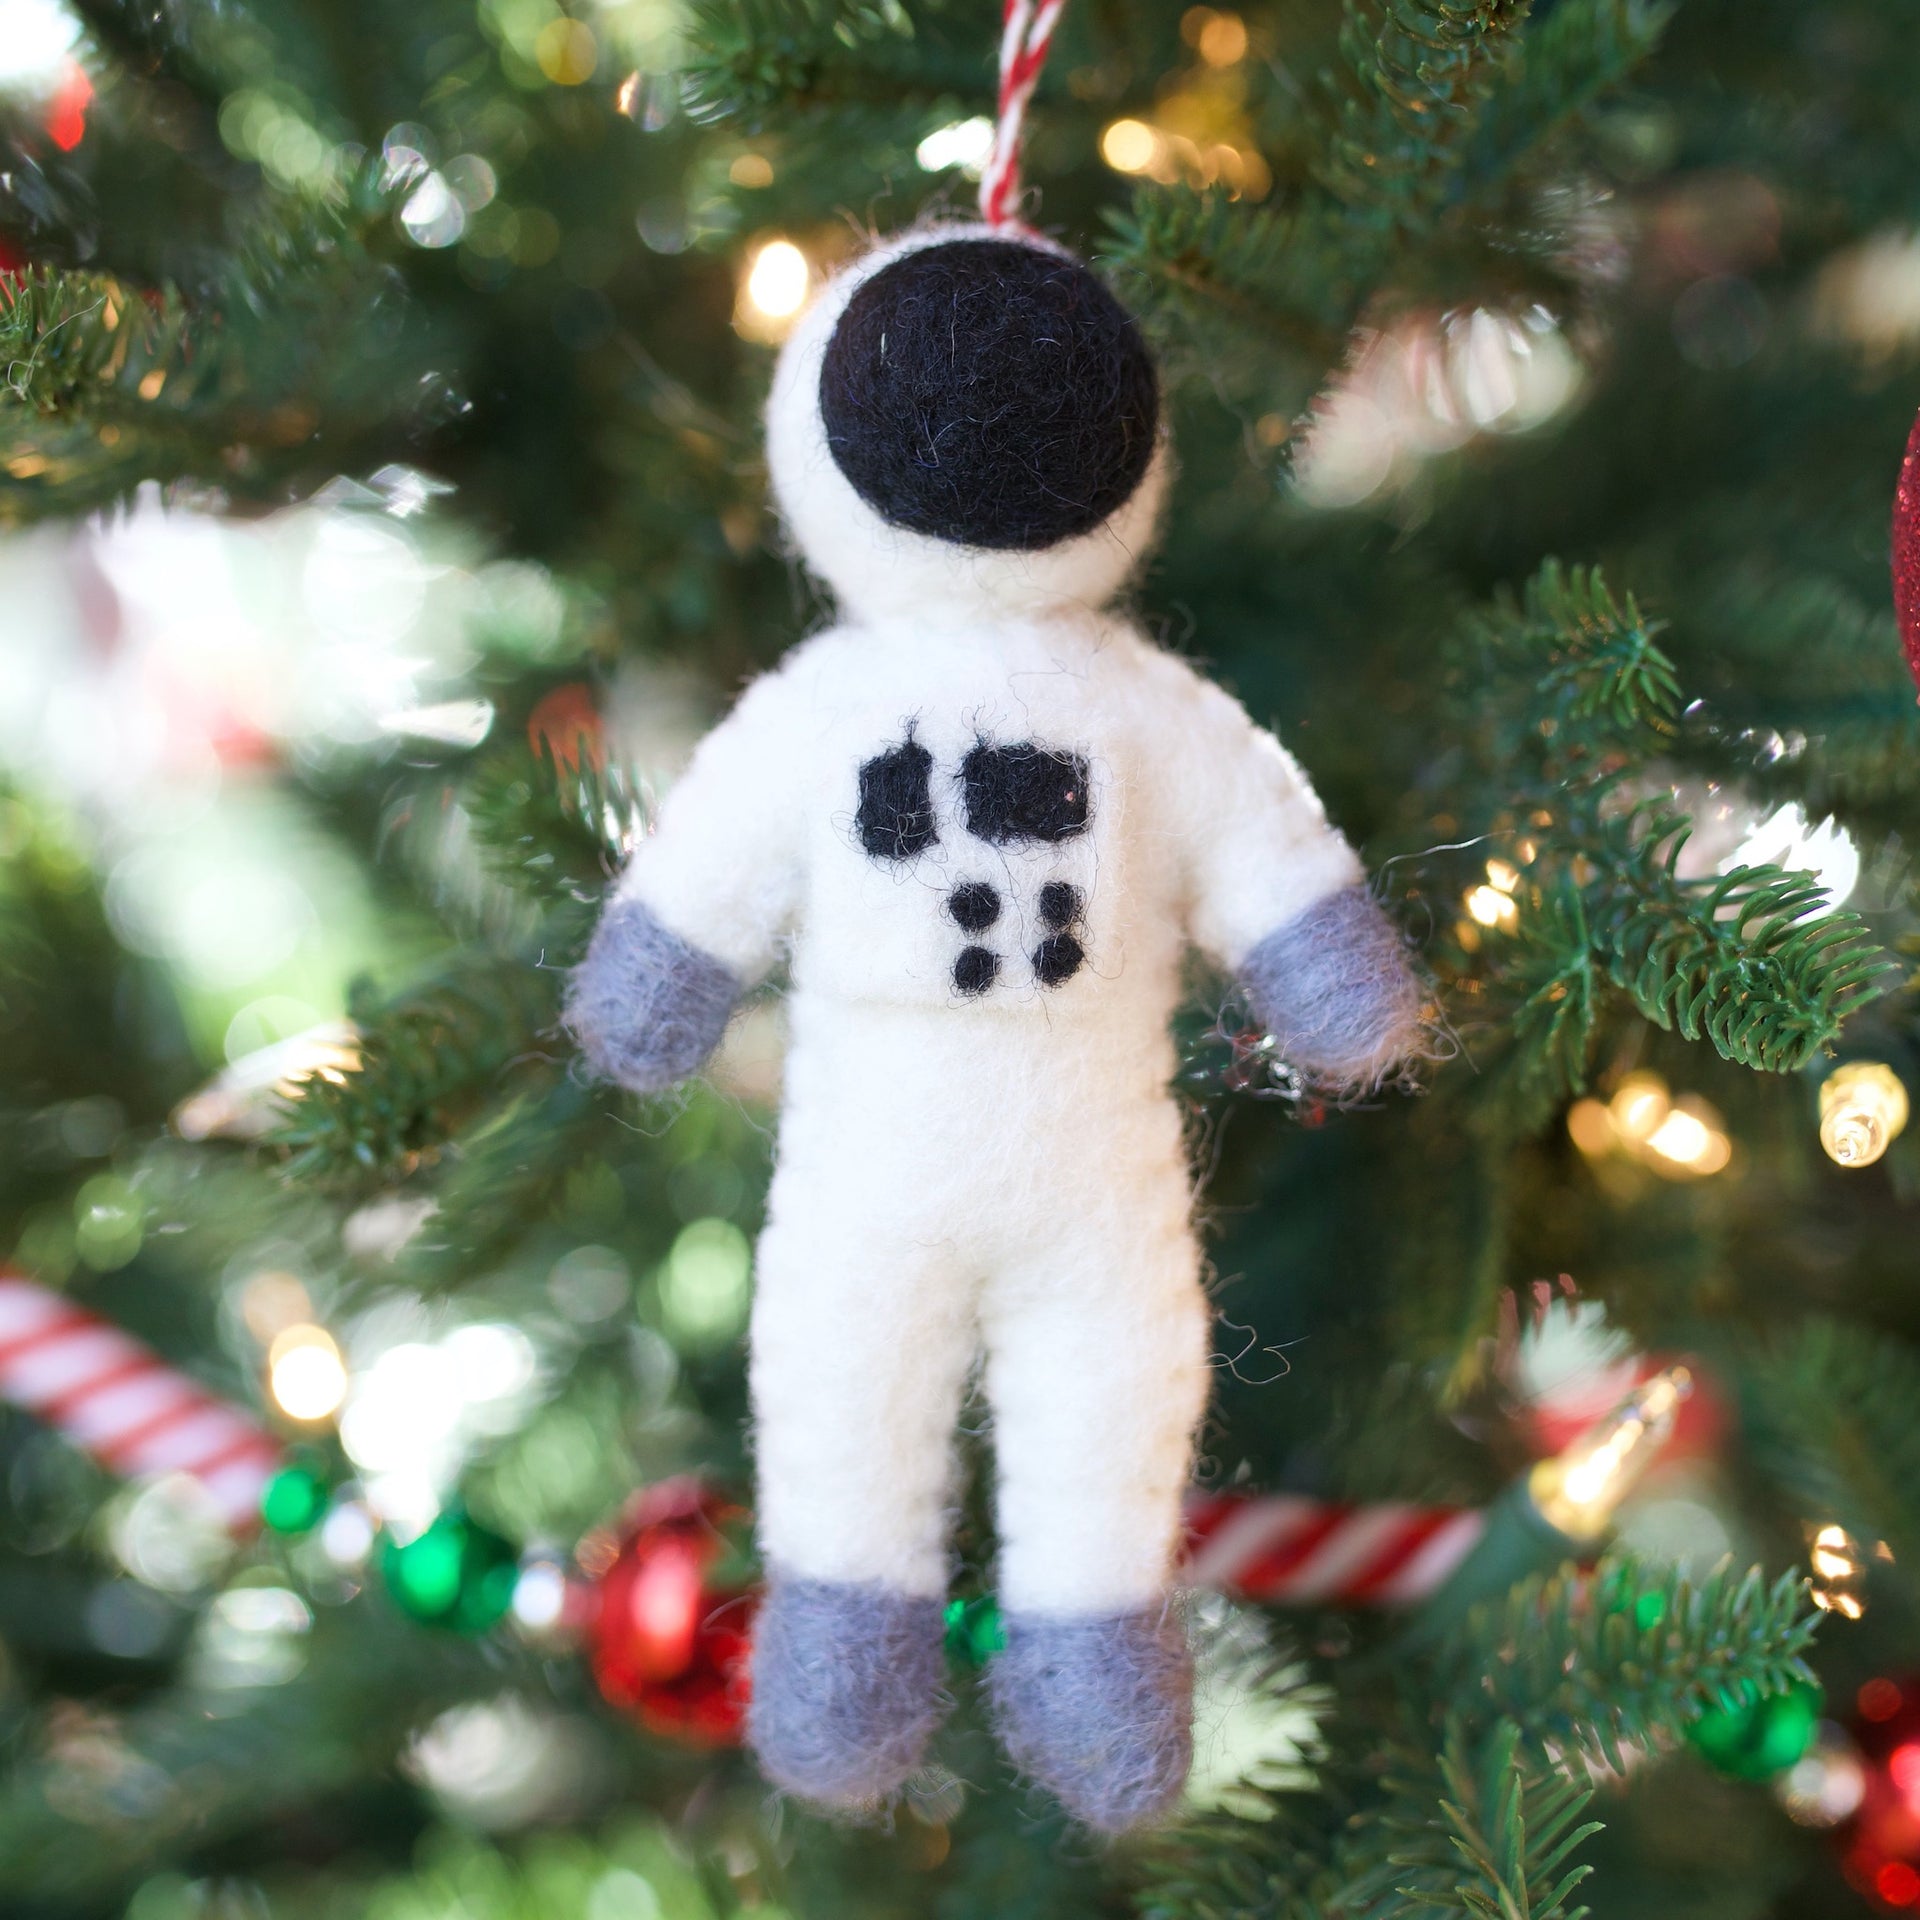 Cute Astronaut Space Ornament for Christmas Tree